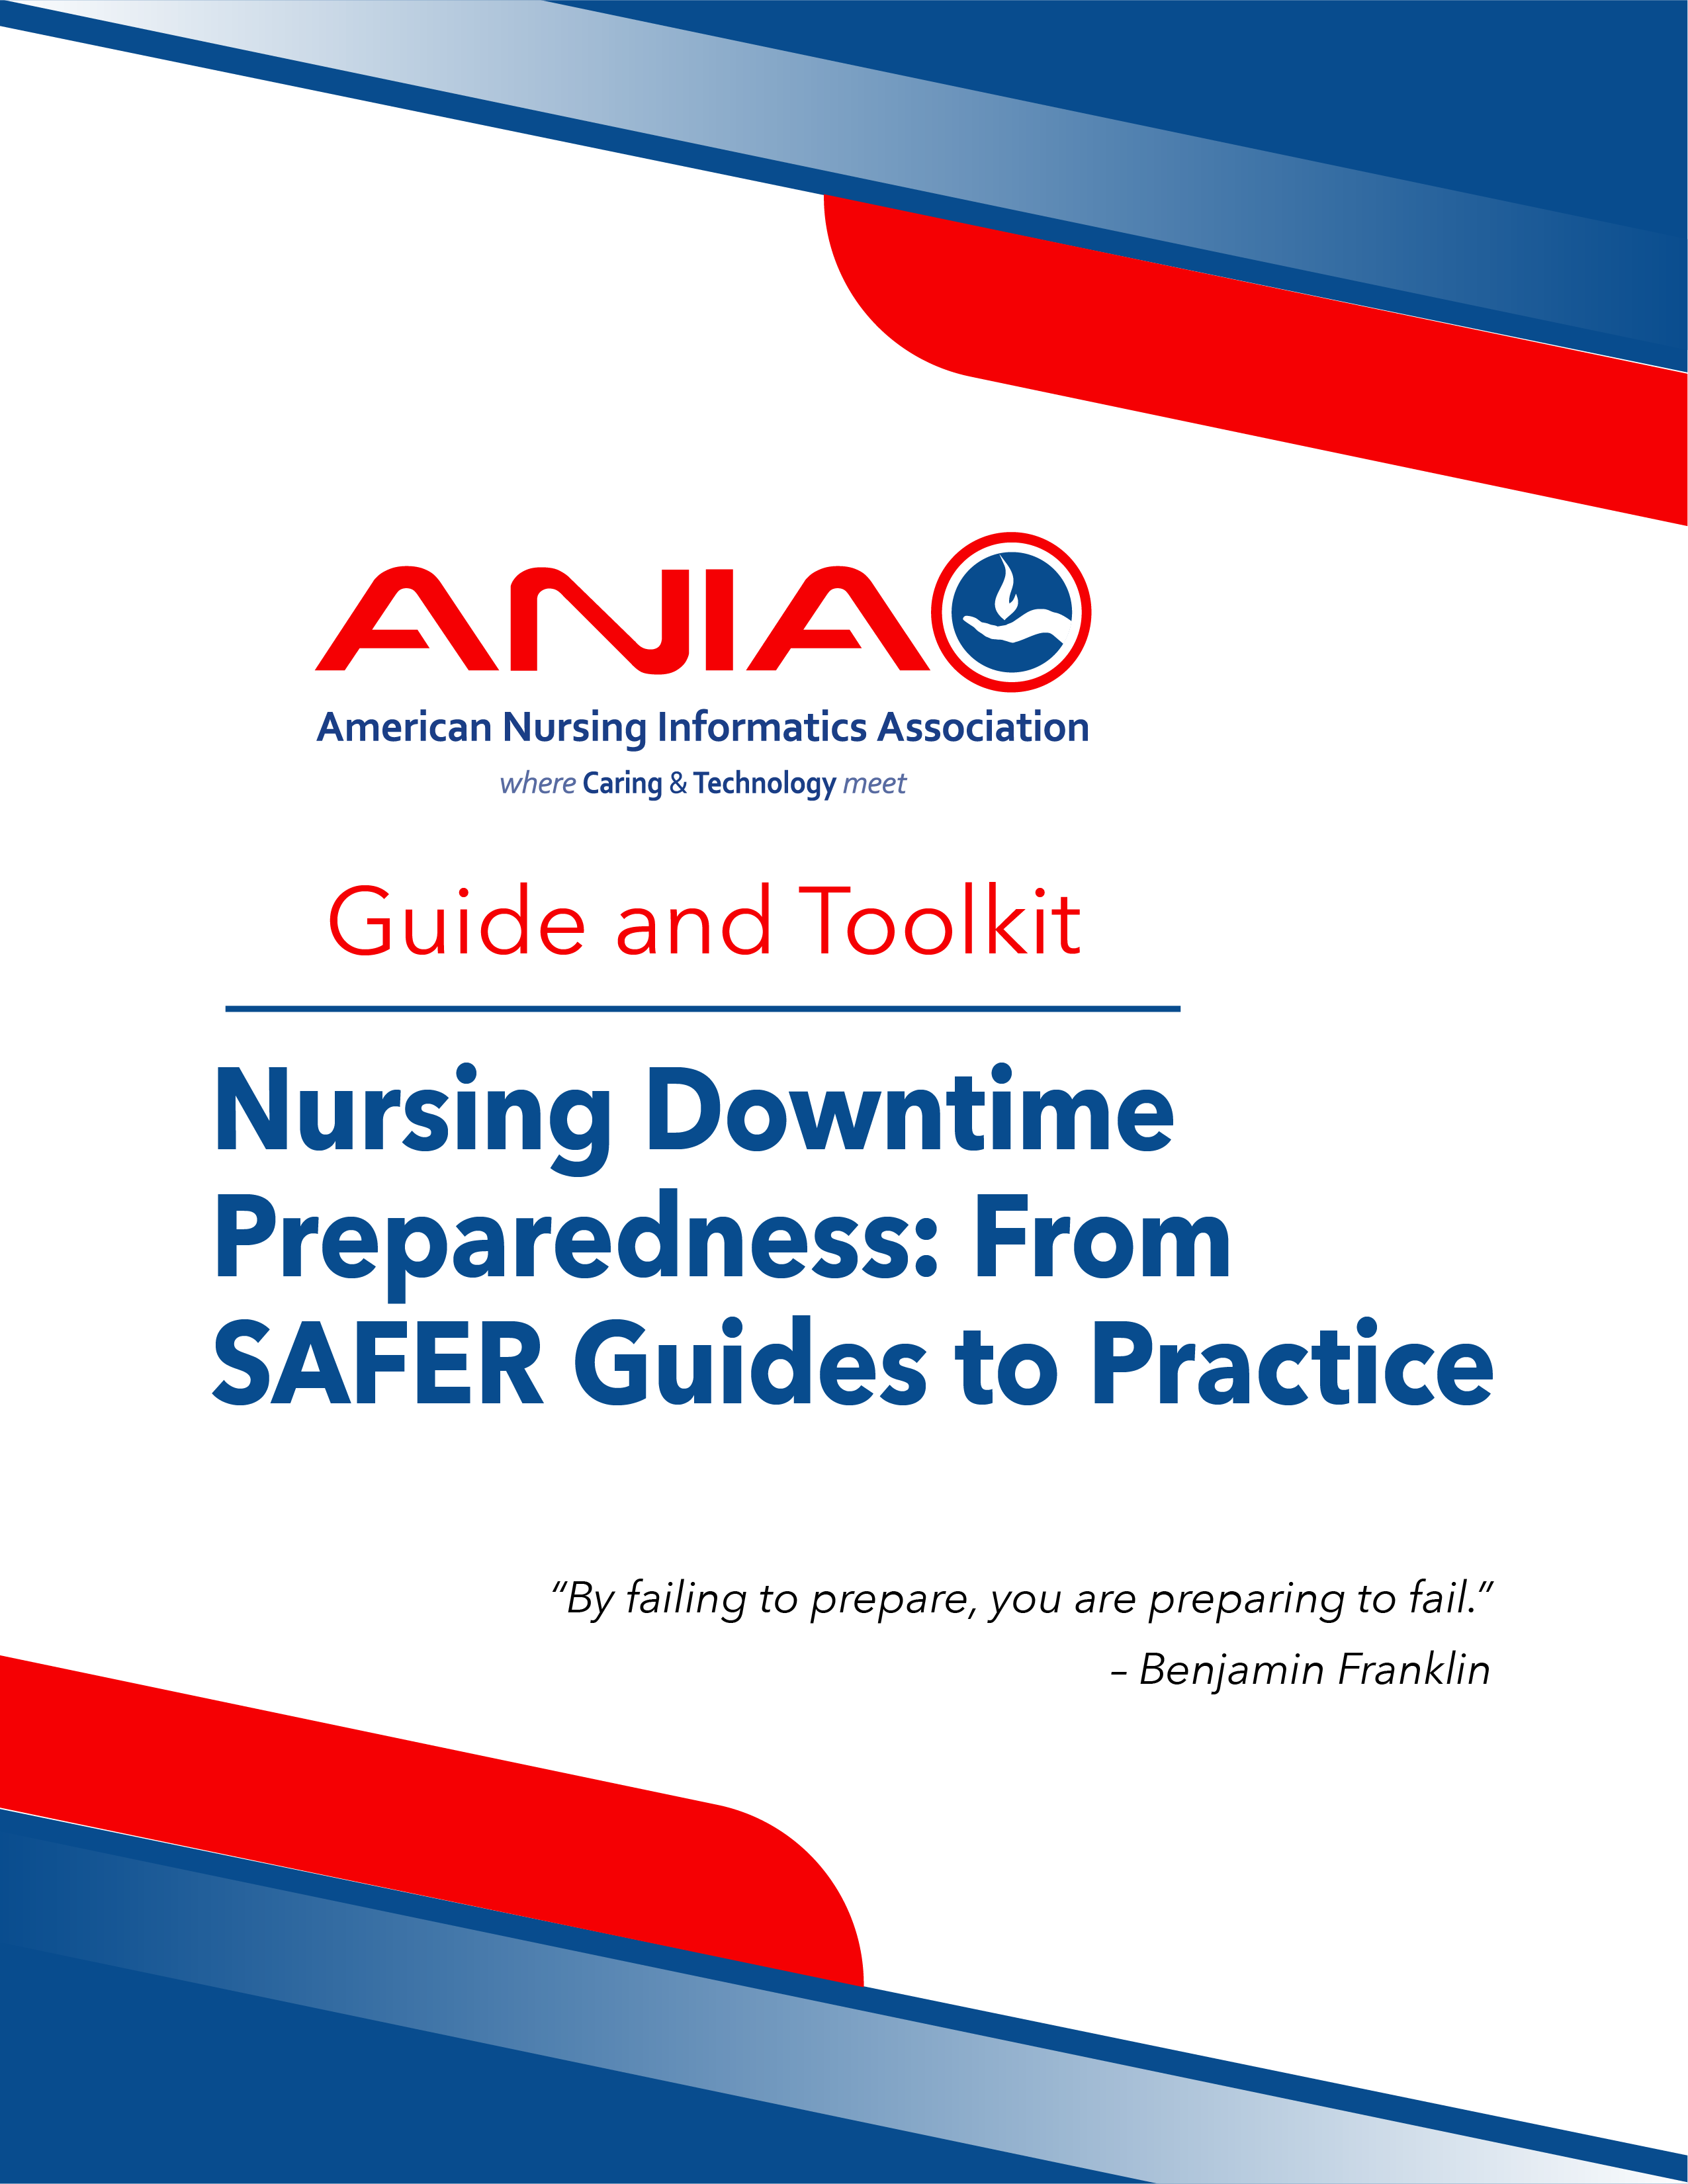 ANIA Guide and Toolkit - Nursing Downtime Preparedness: From SAFER Guides to Practice